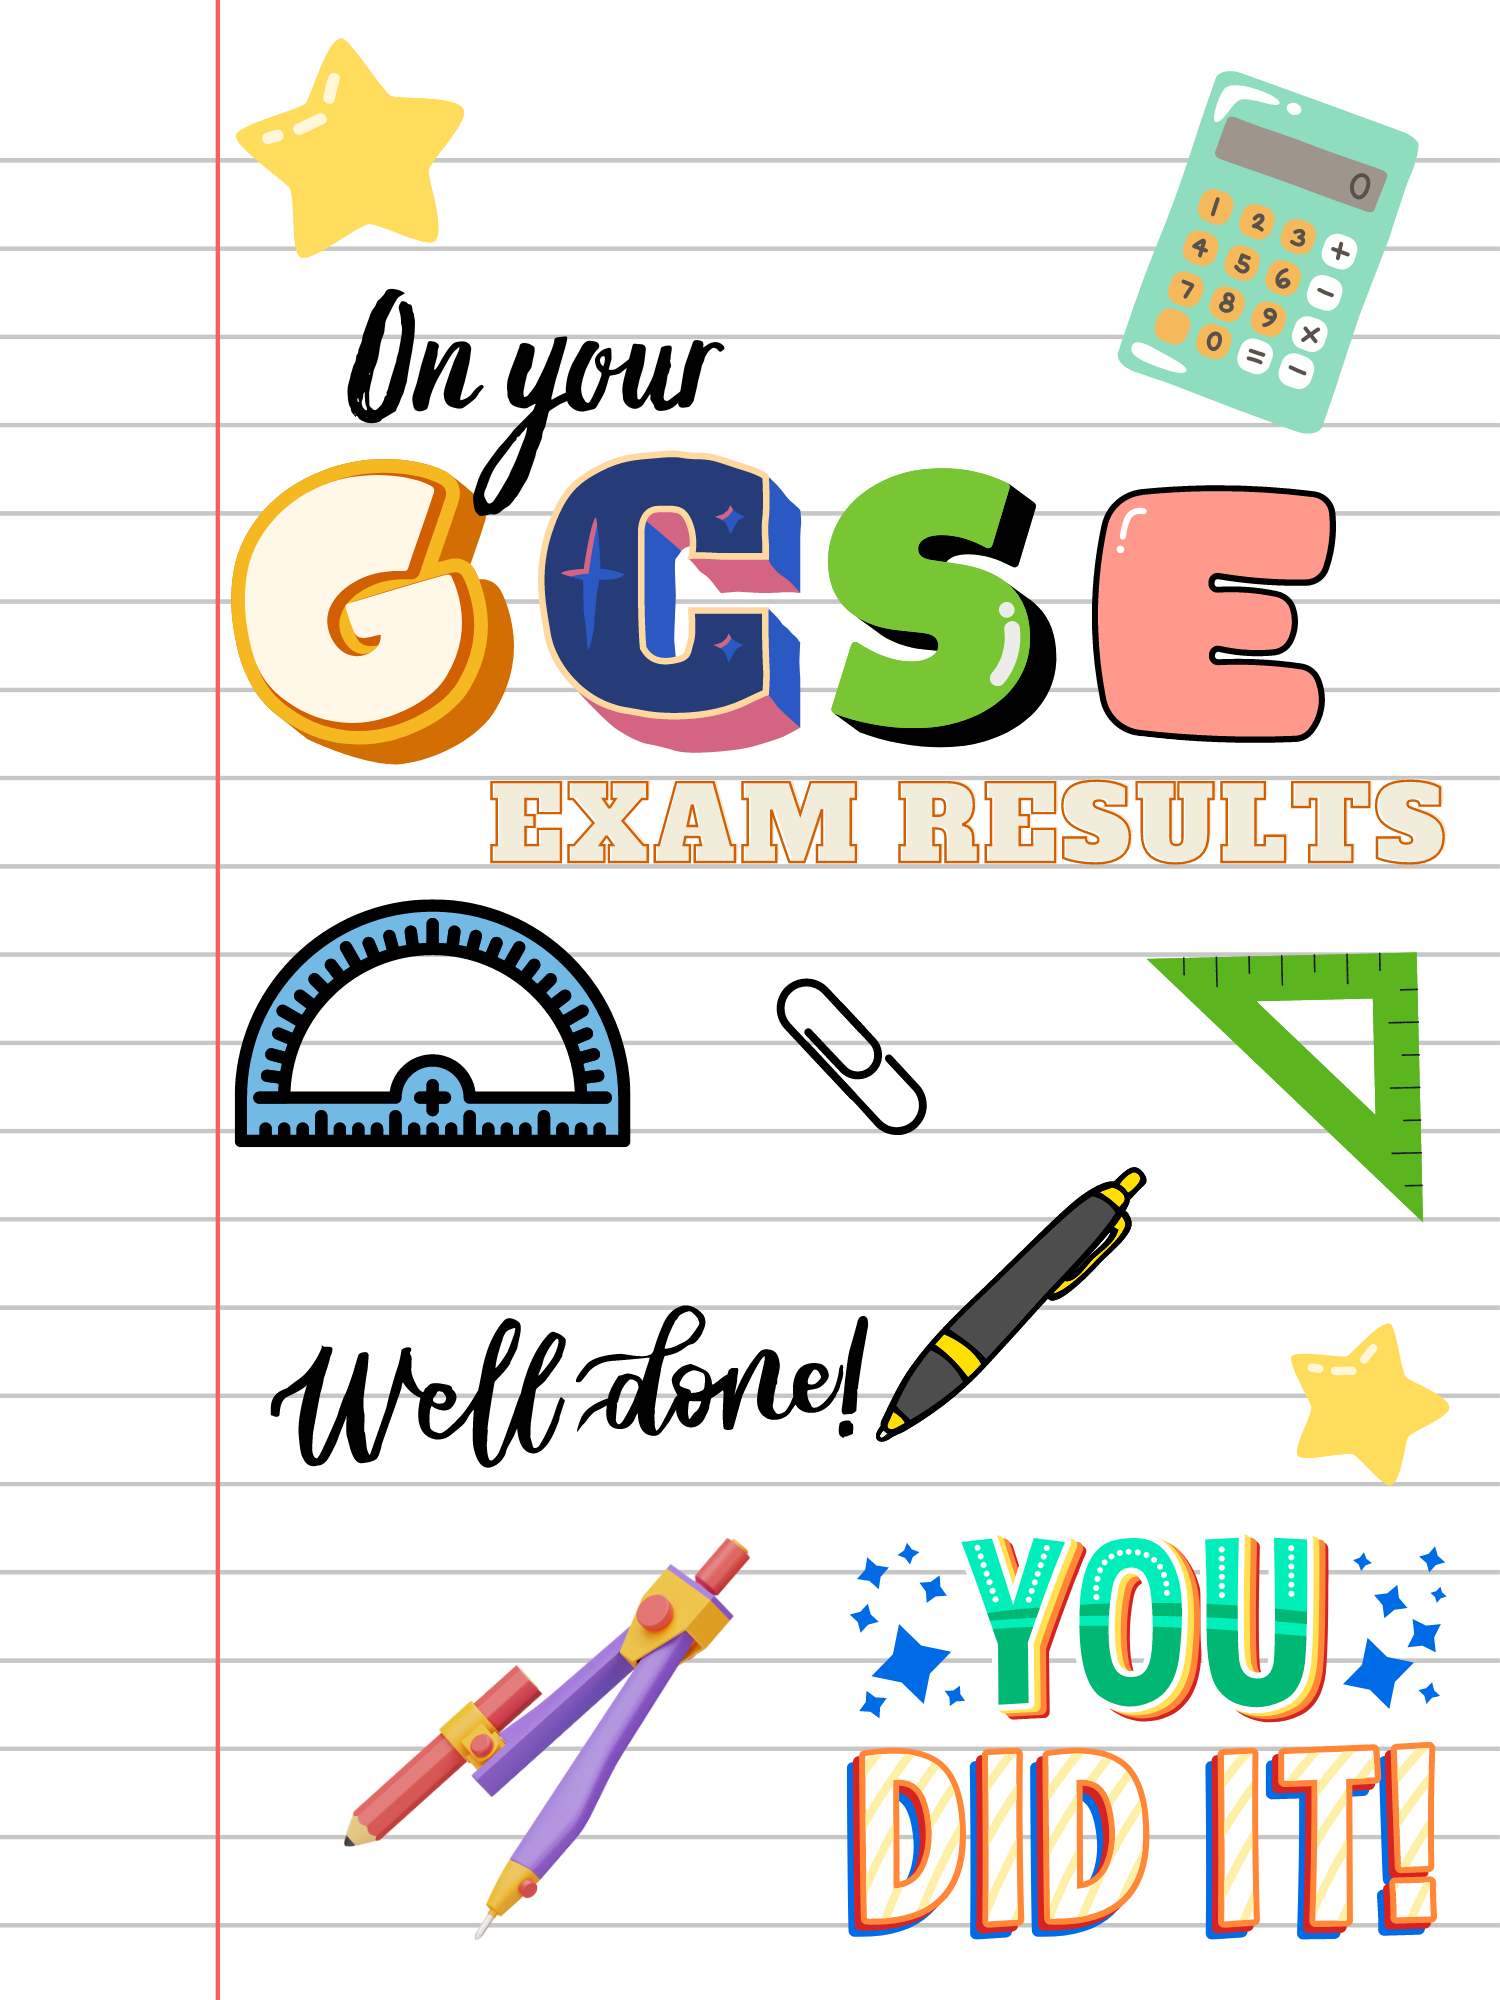 GCSE Exam Results Edible Printed Cake Topper Icing Sheet Rectangle / Oblong